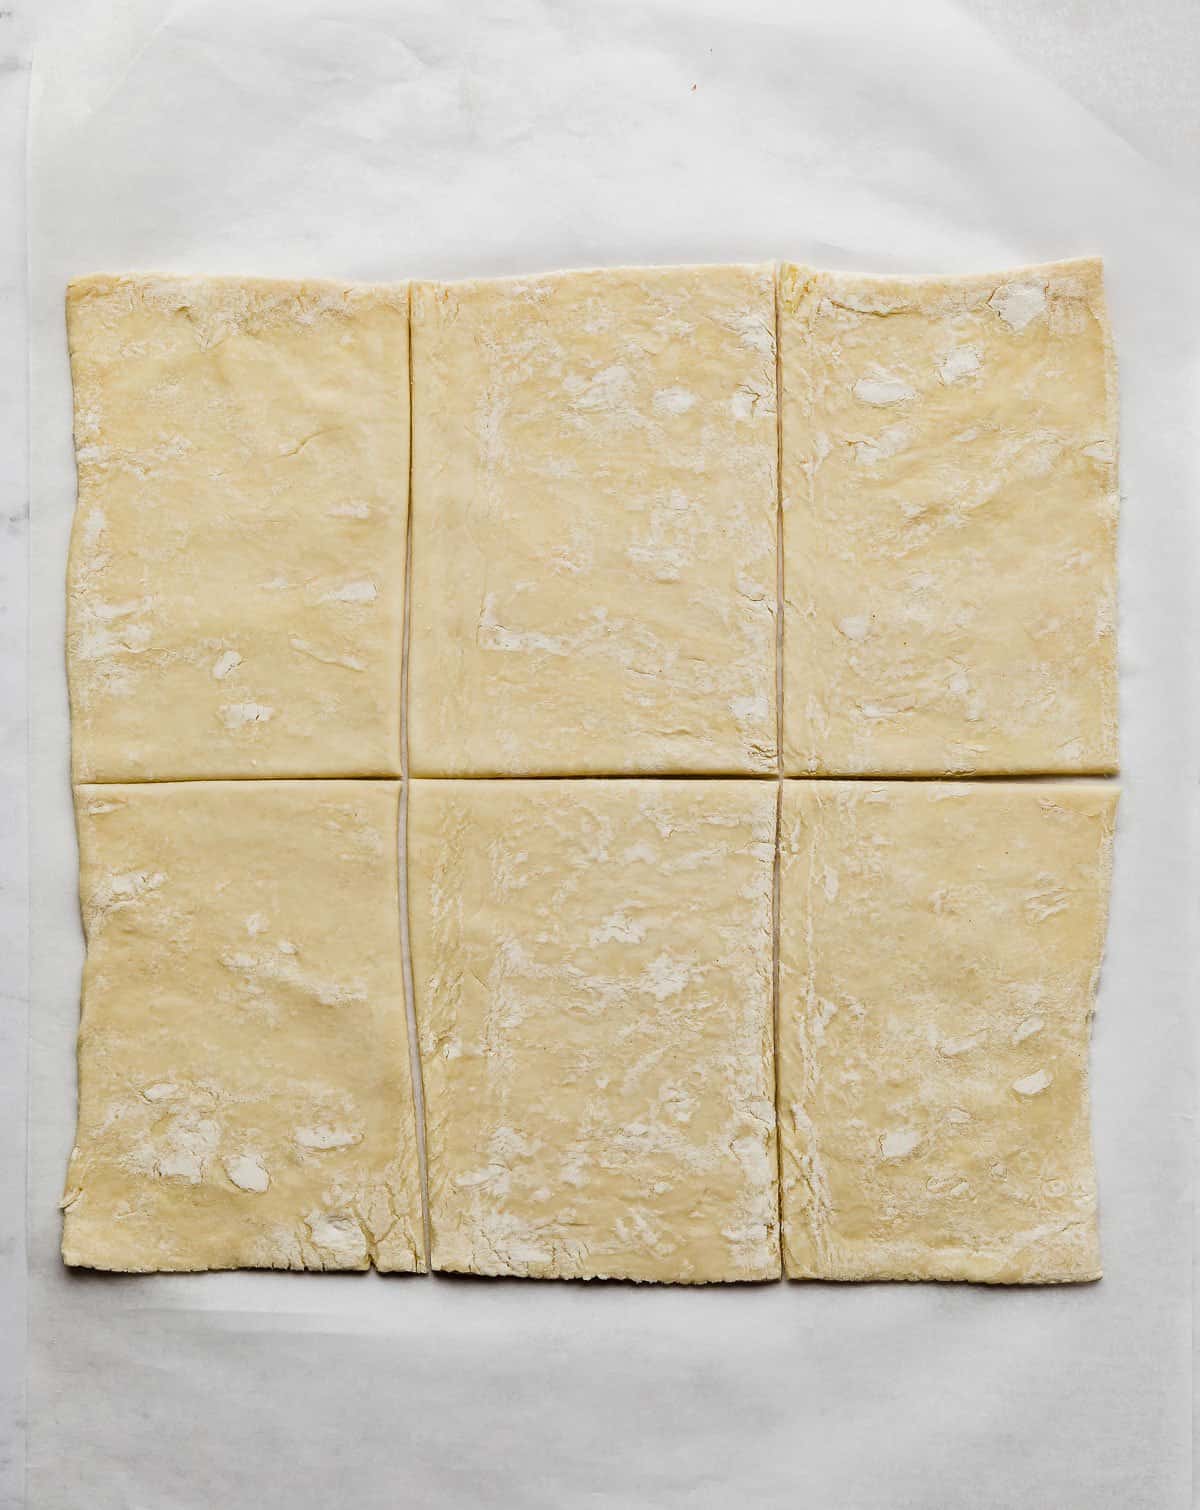 A rectangle of puff pastry cut into 6 rectangular pieces on a white background.